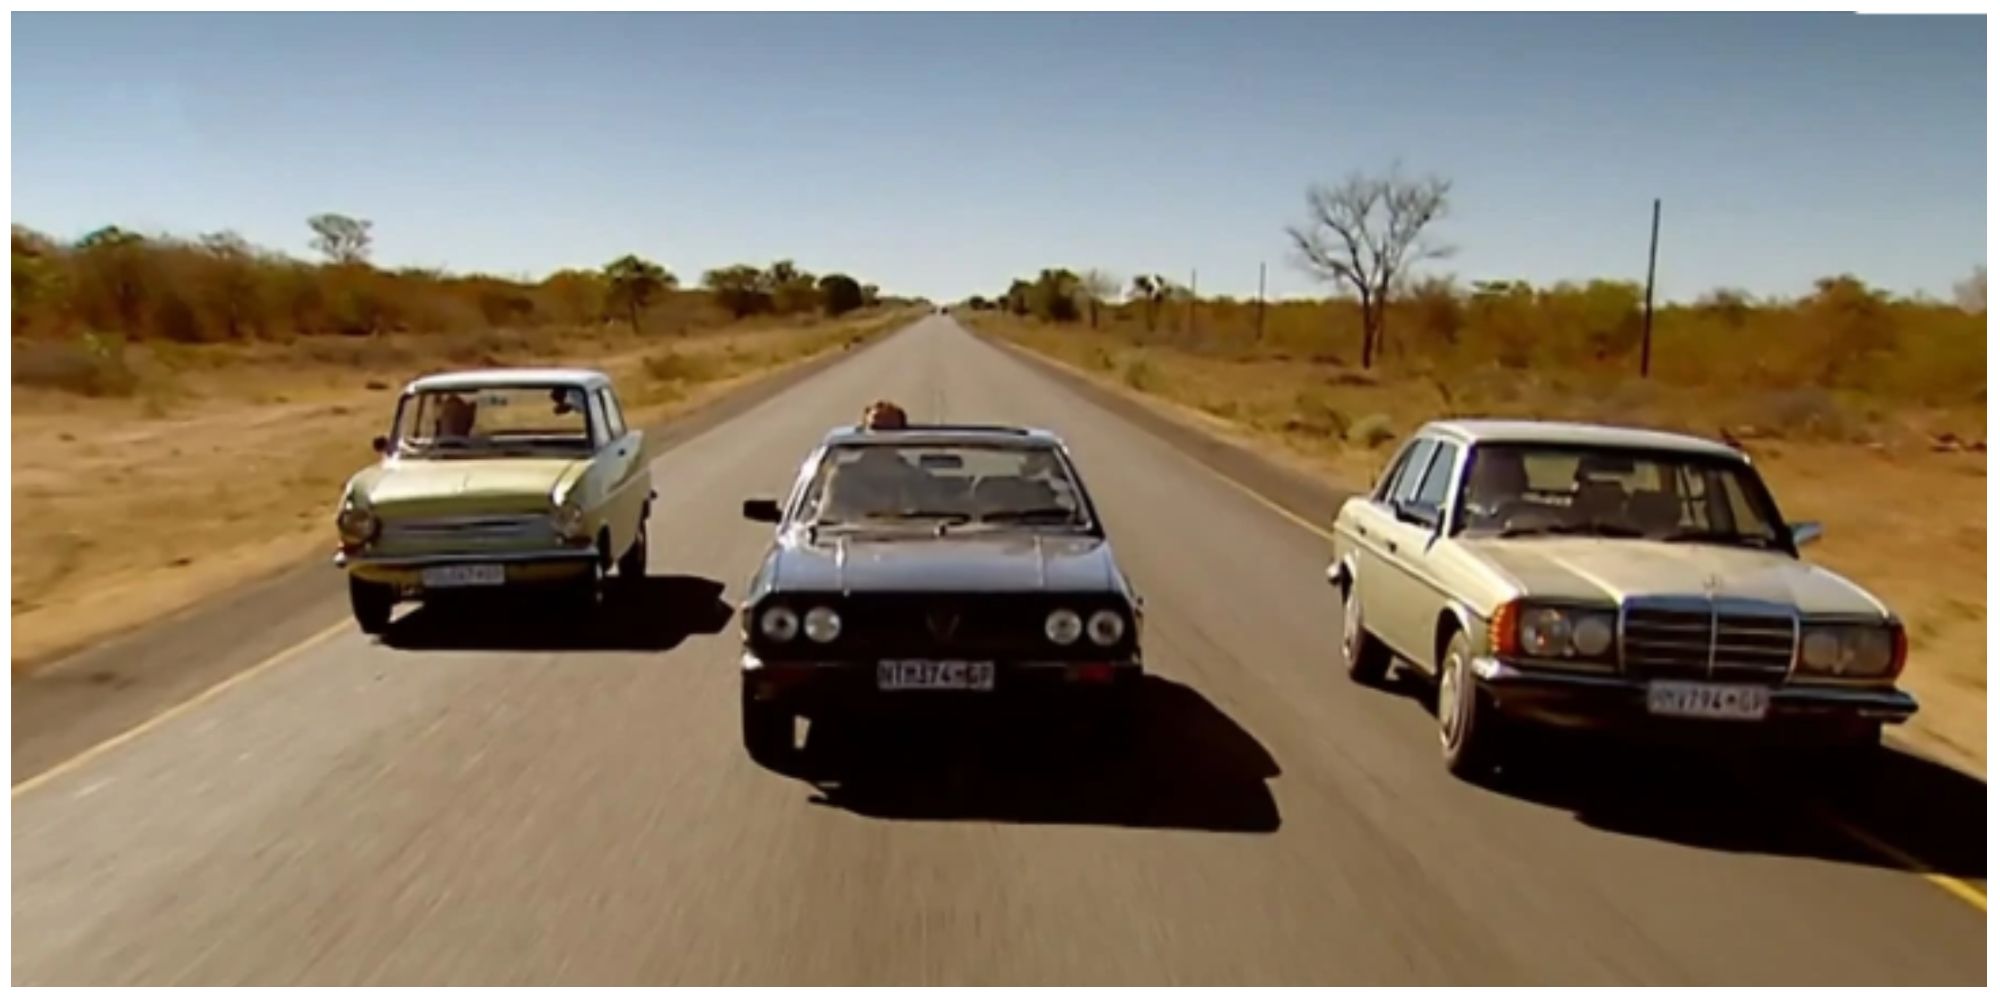 Top Gear Botswana Special three cars on road